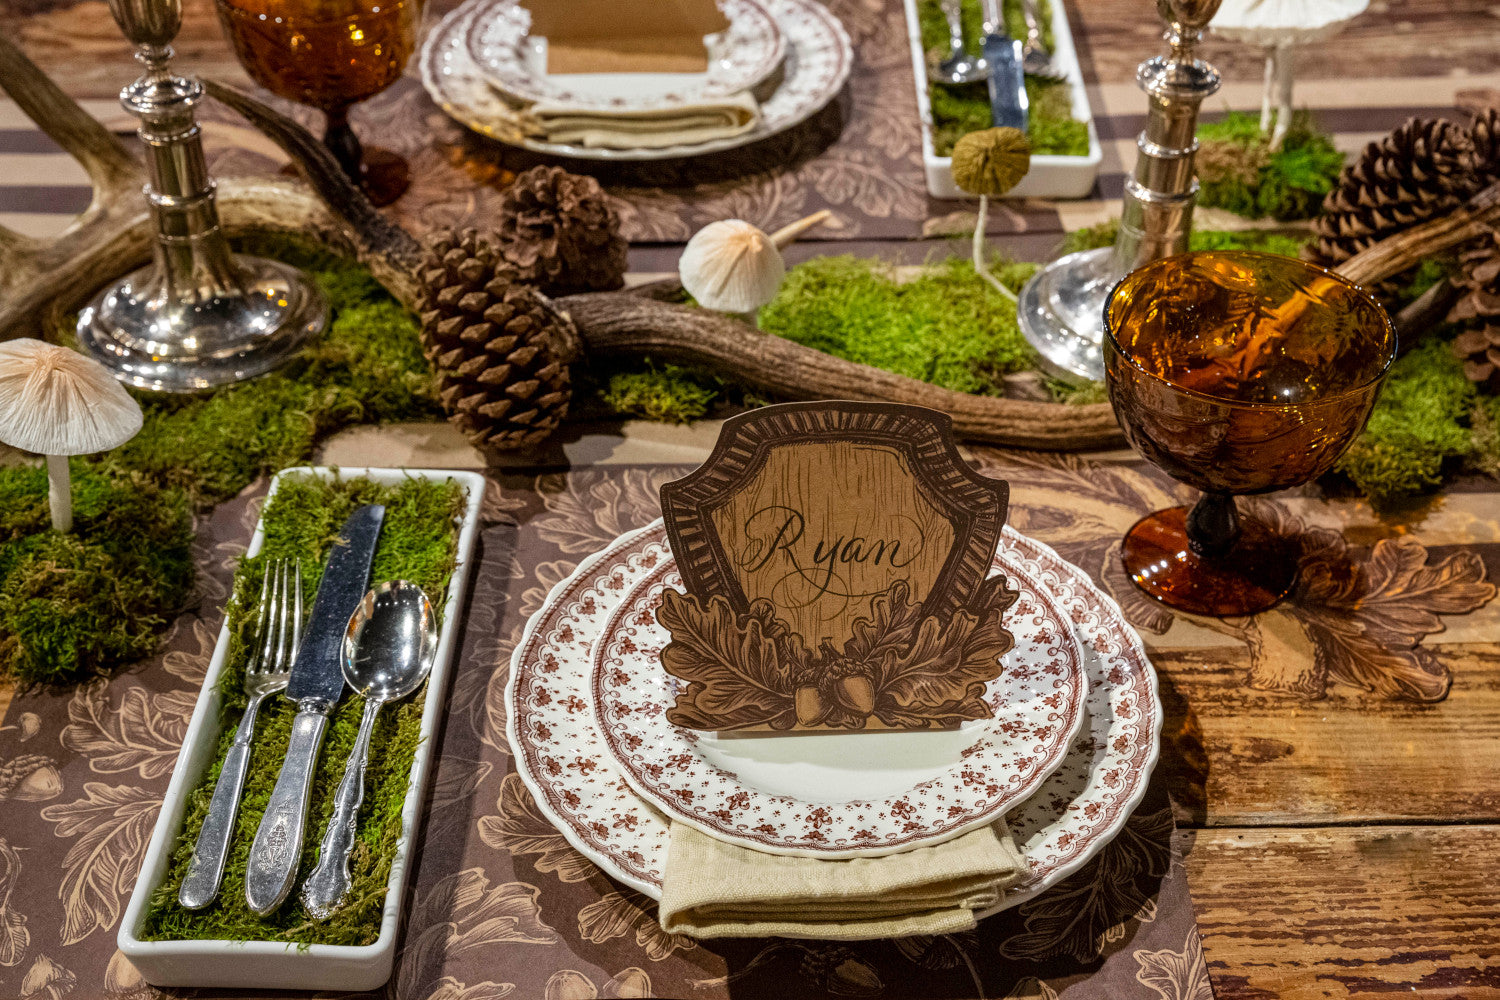 A Hester &amp; Cook Oak Crest place card with leaves and acorns on it, perfect for a Thanksgiving setting.